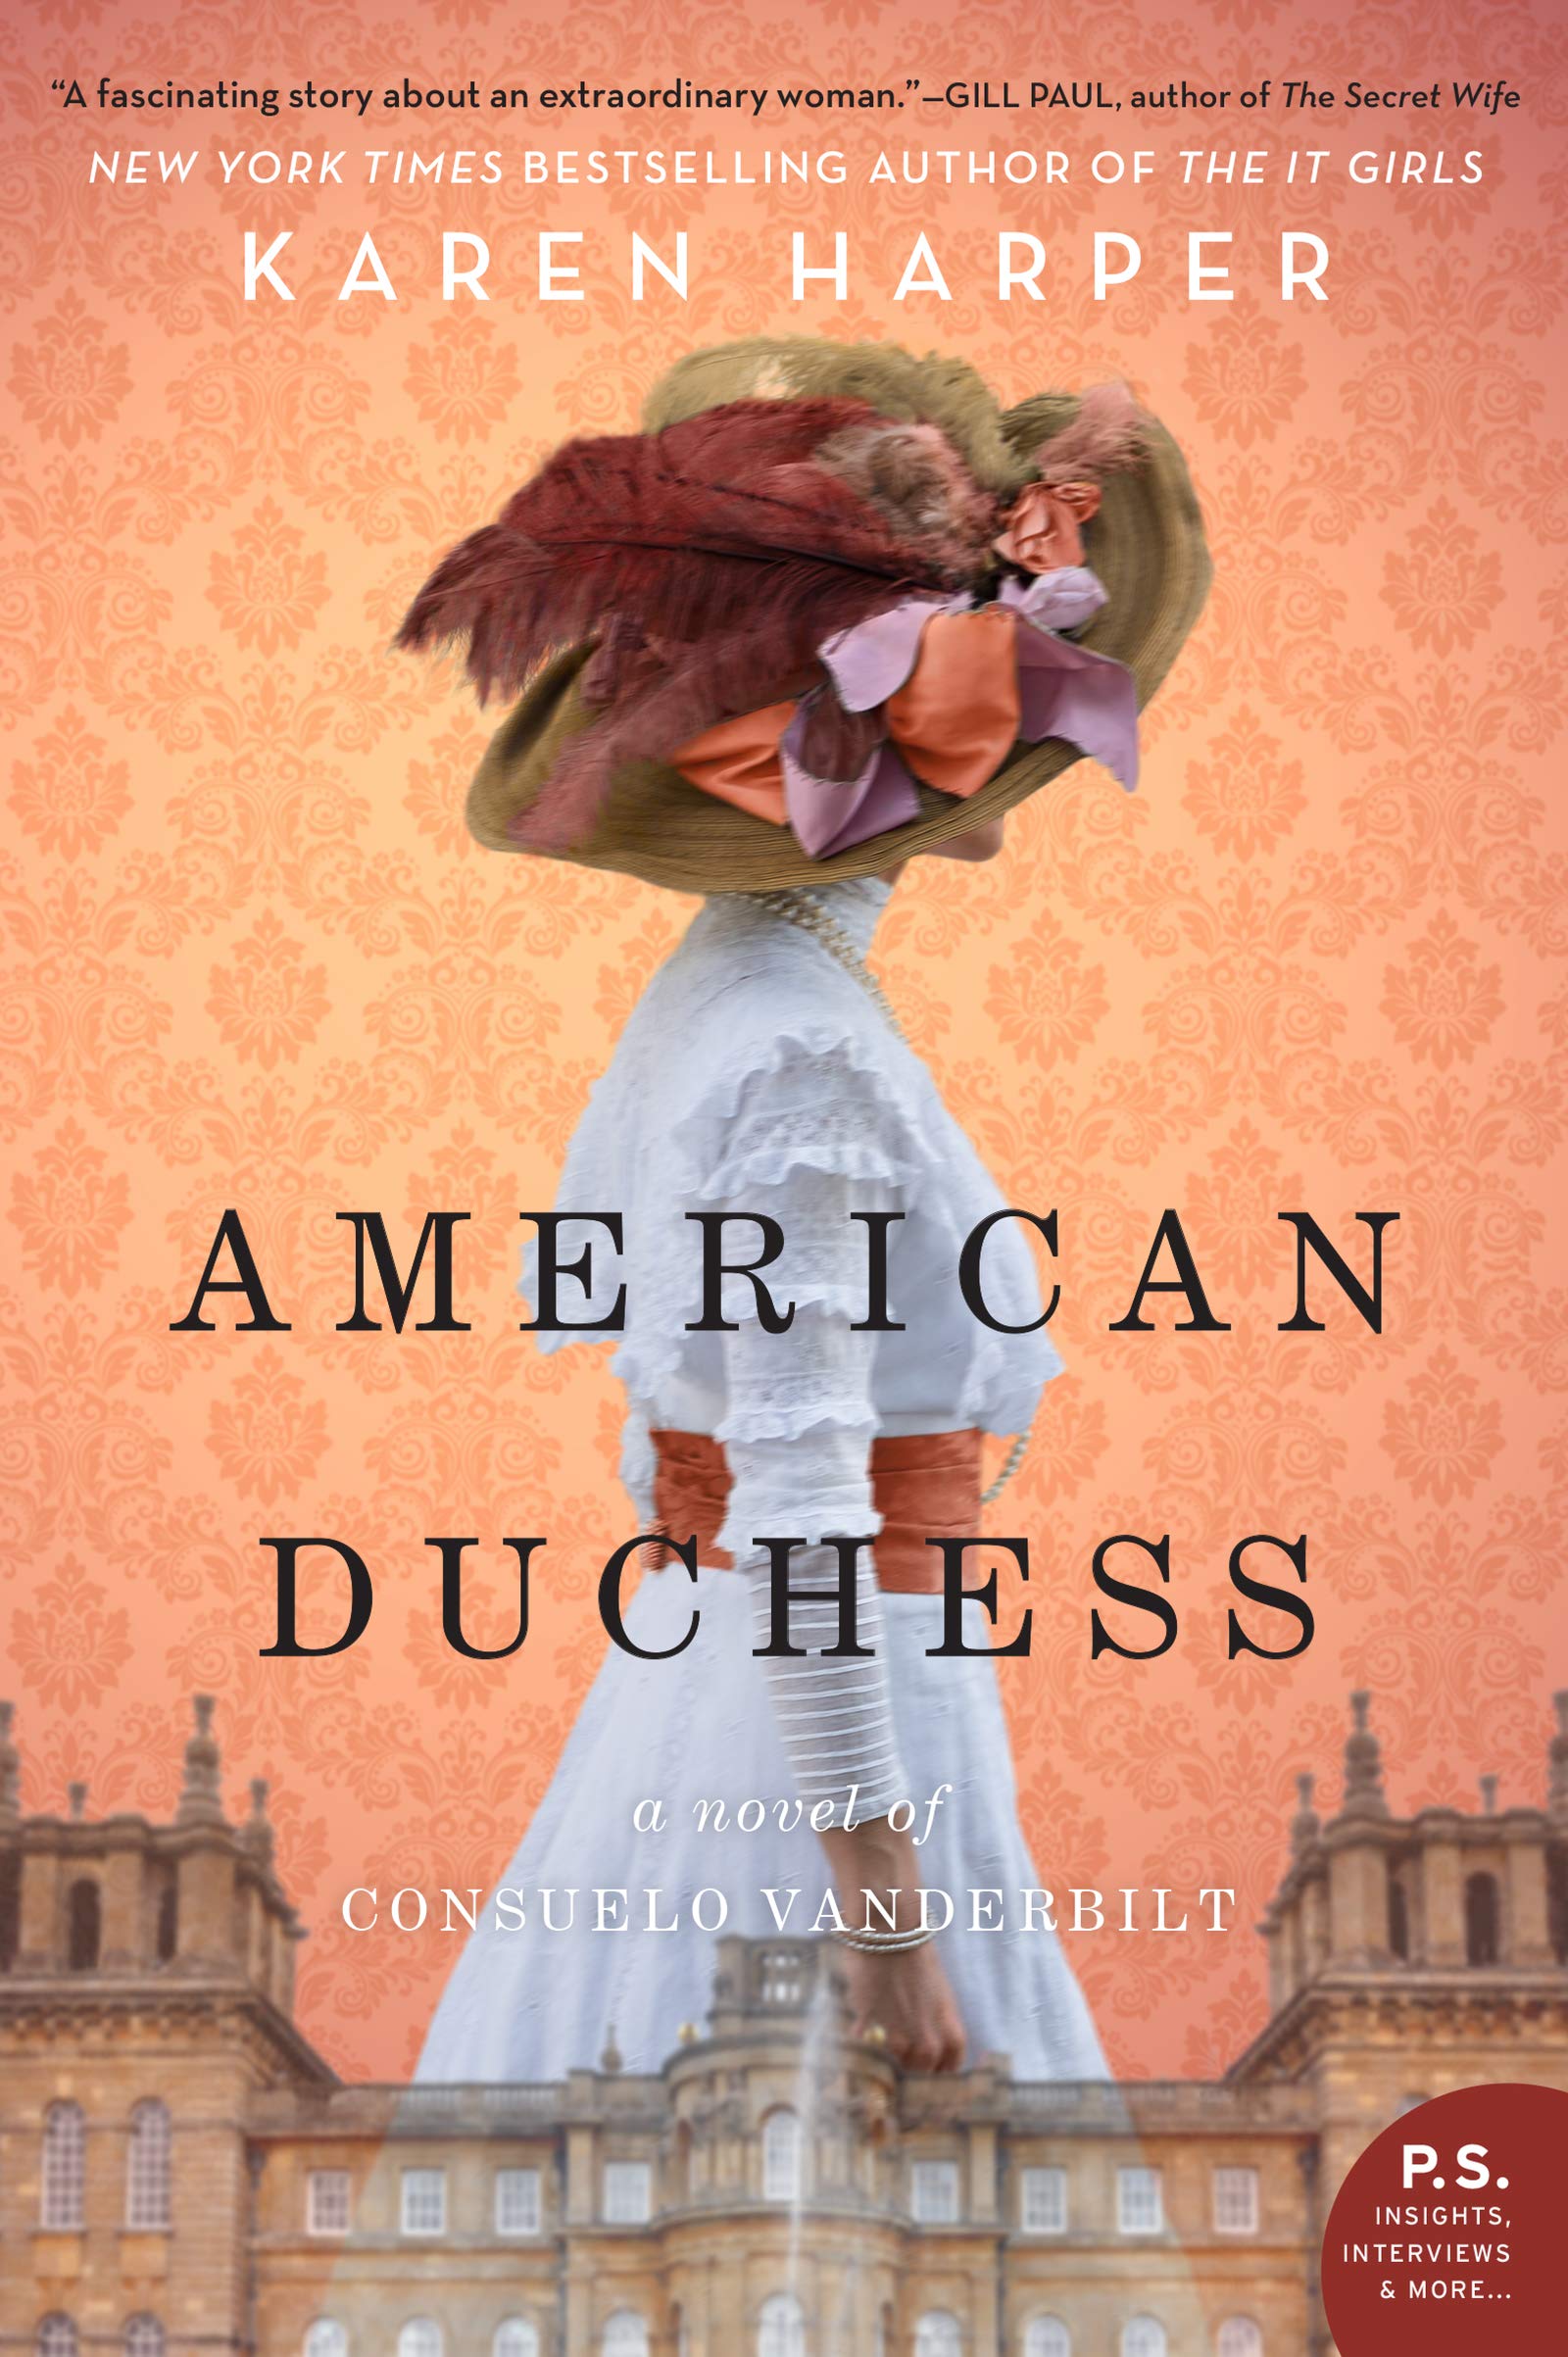  Read the newest historical novel by Karen Harper, American Duchess, about the fascinating life of Consuelo Vanderbilt (will be released Feb. 26th). 